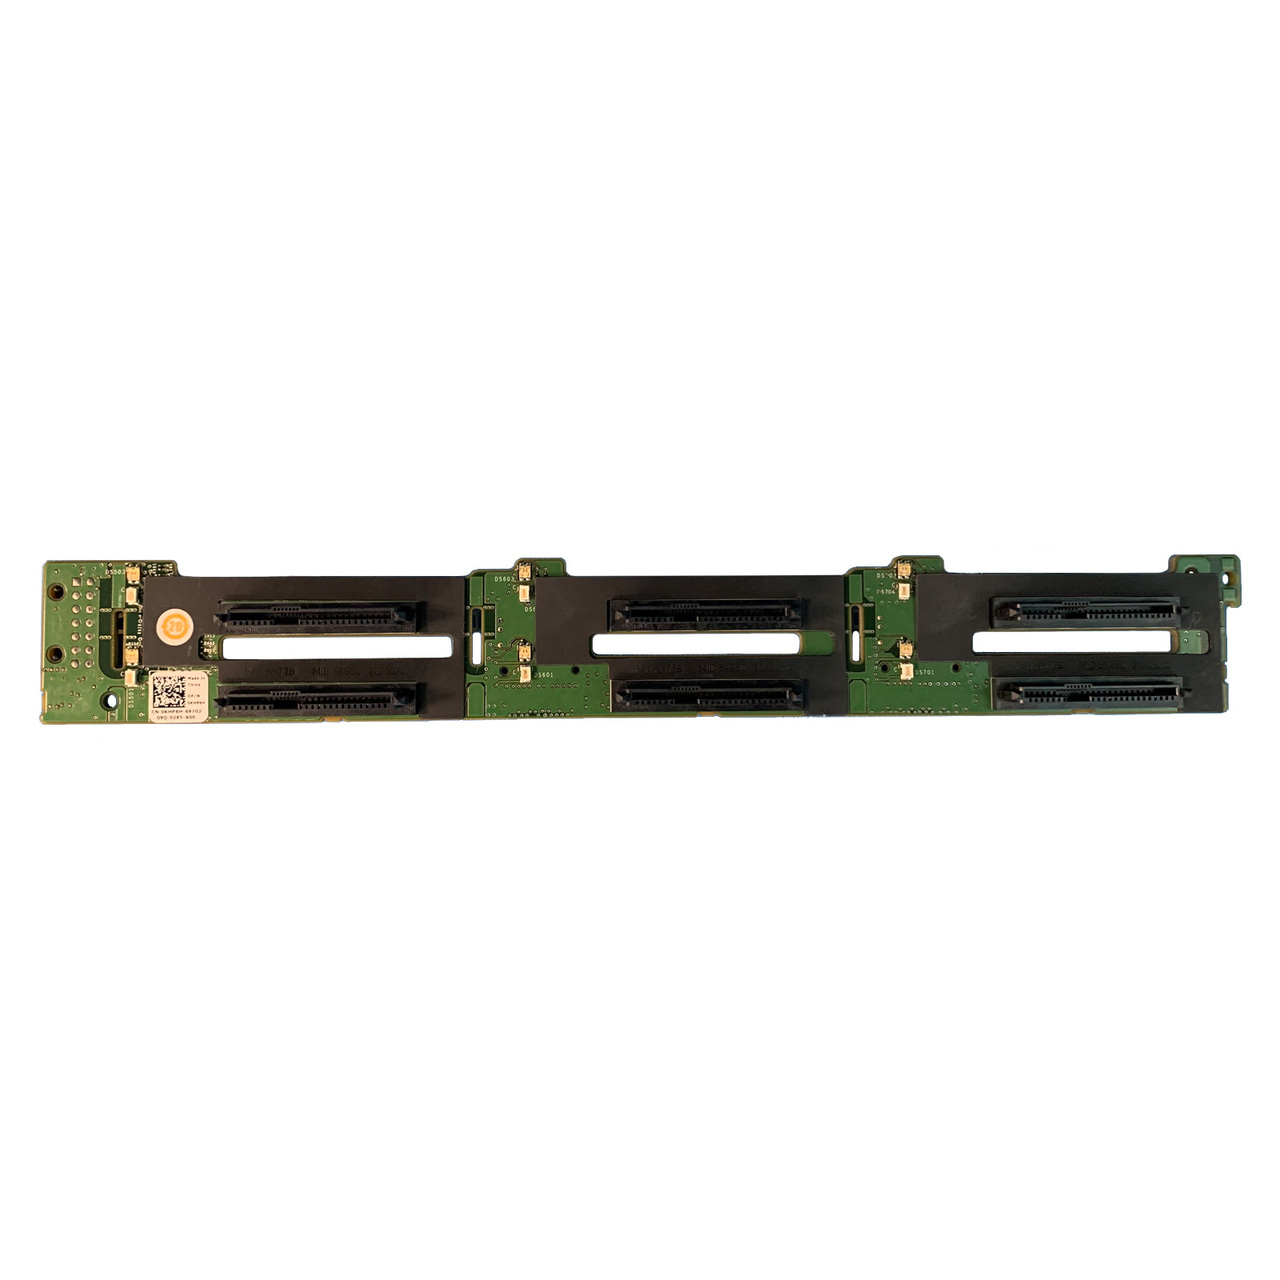 D109N | Dell SAS Backplane Board for PowerEdge R610